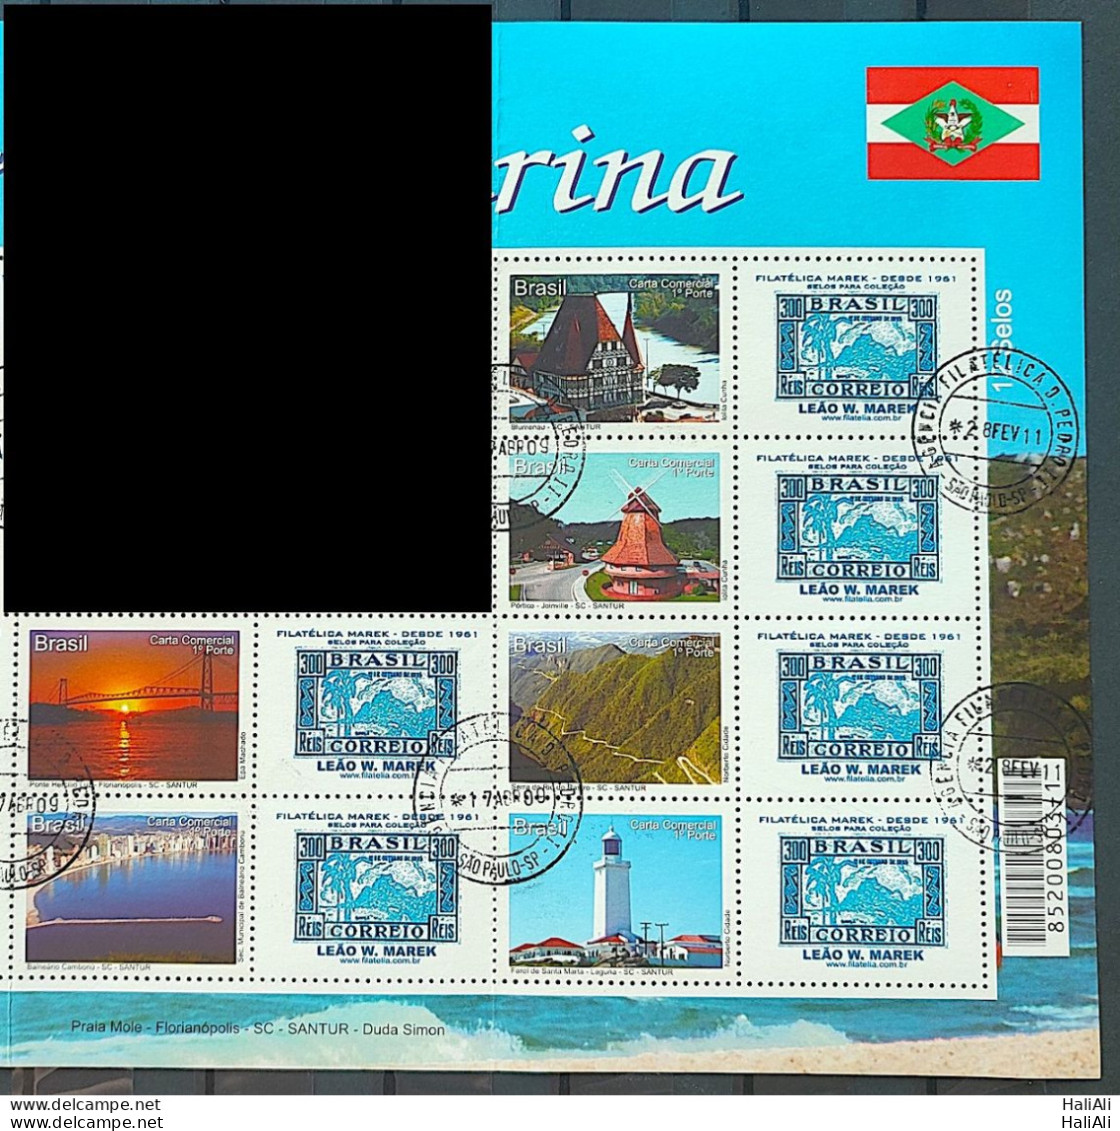 C 2783 Brazil Personalized Stamp Santa Catarina 2009 CPD SP Right Side Od The Sheet Very Rare - Personalized Stamps